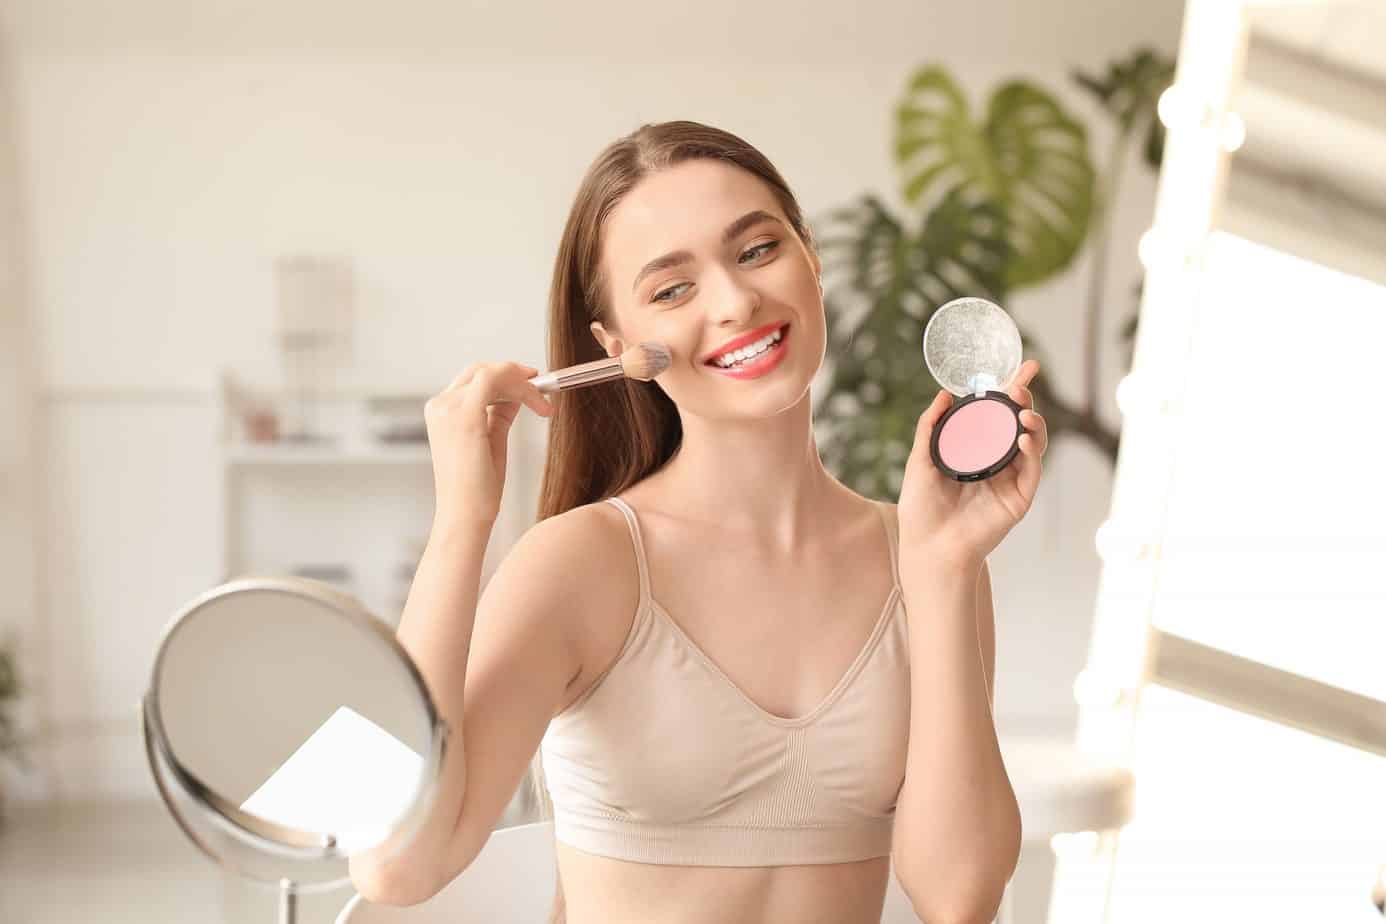 Blush – how to choose the right one?